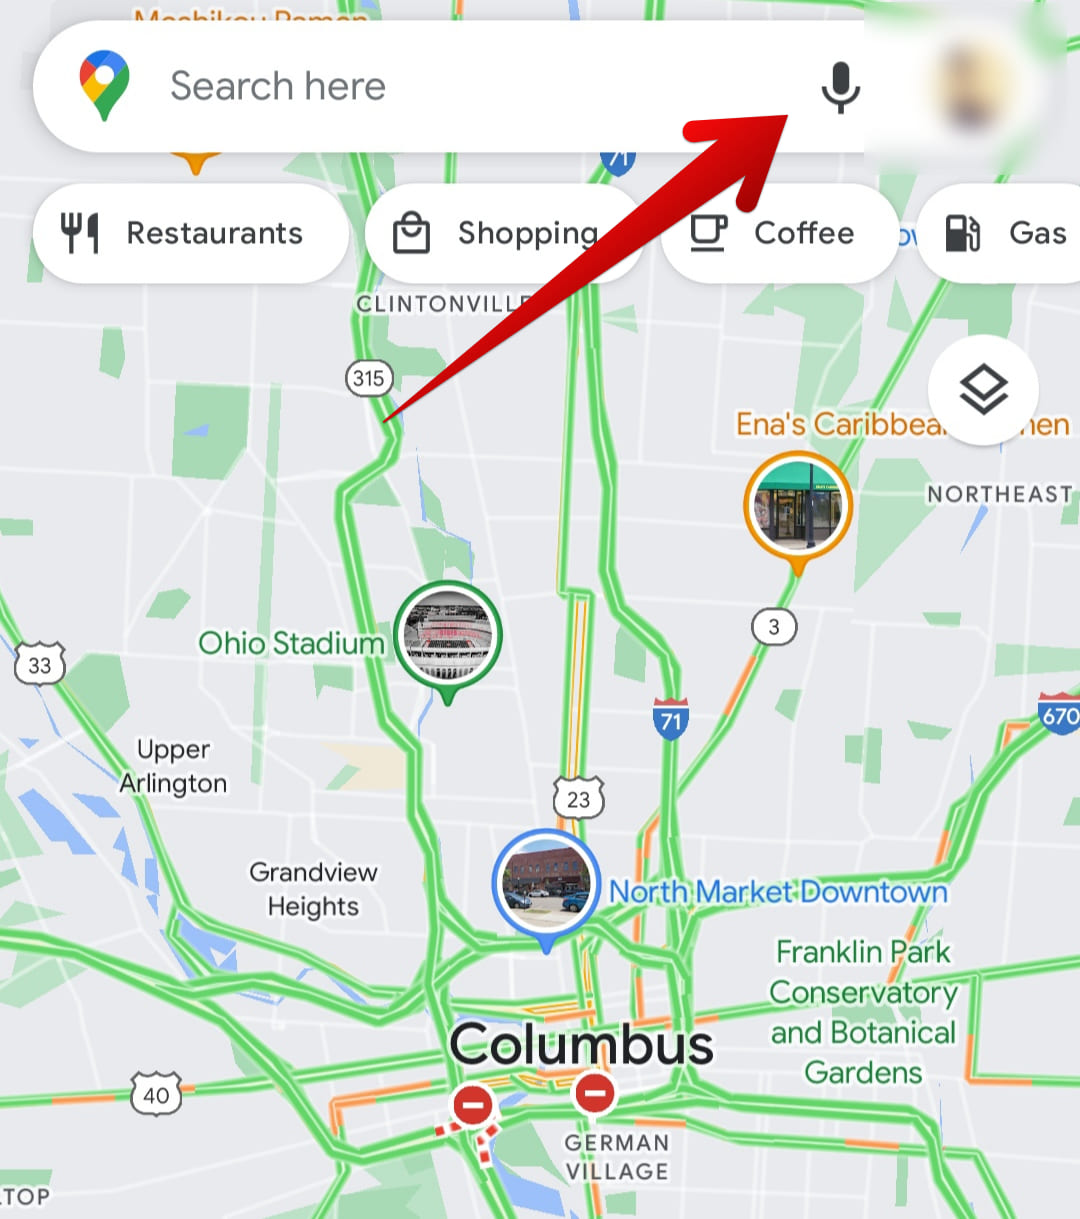 Using voice search with Google Maps